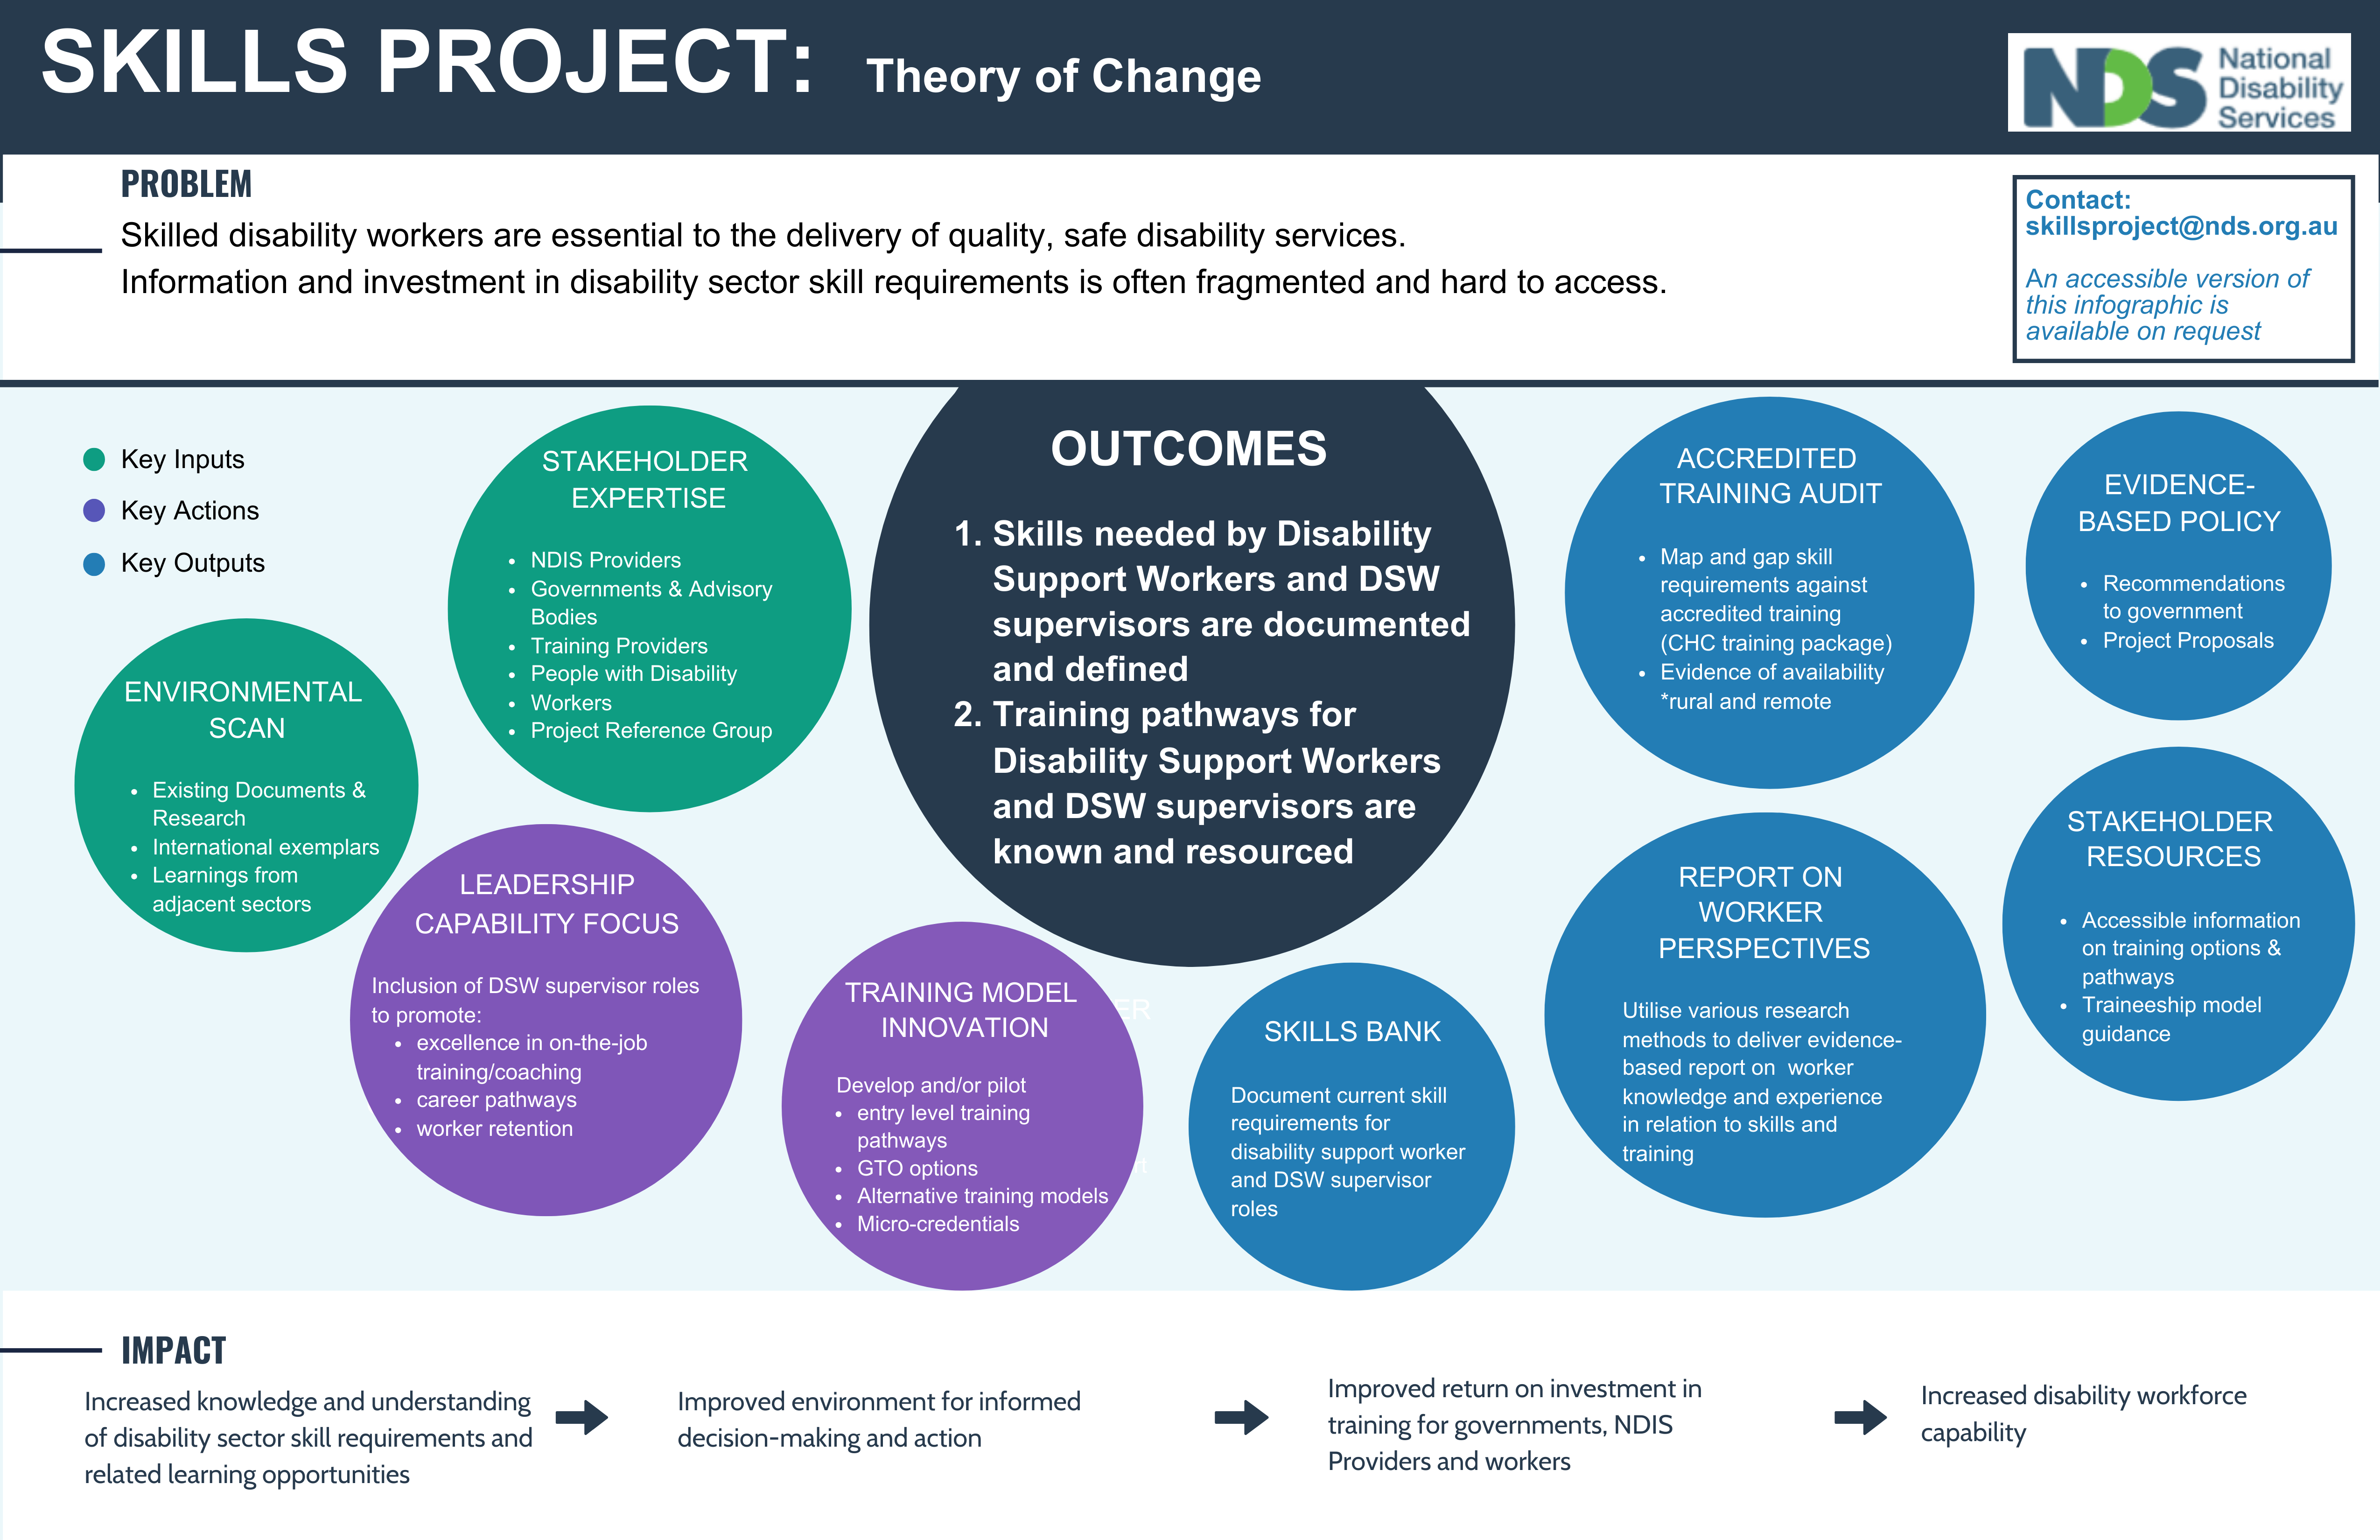 NDS Skills Project: Theory of Change infographic shows the problem, outcomes, key inputs, key actions, key outputs, and impact.